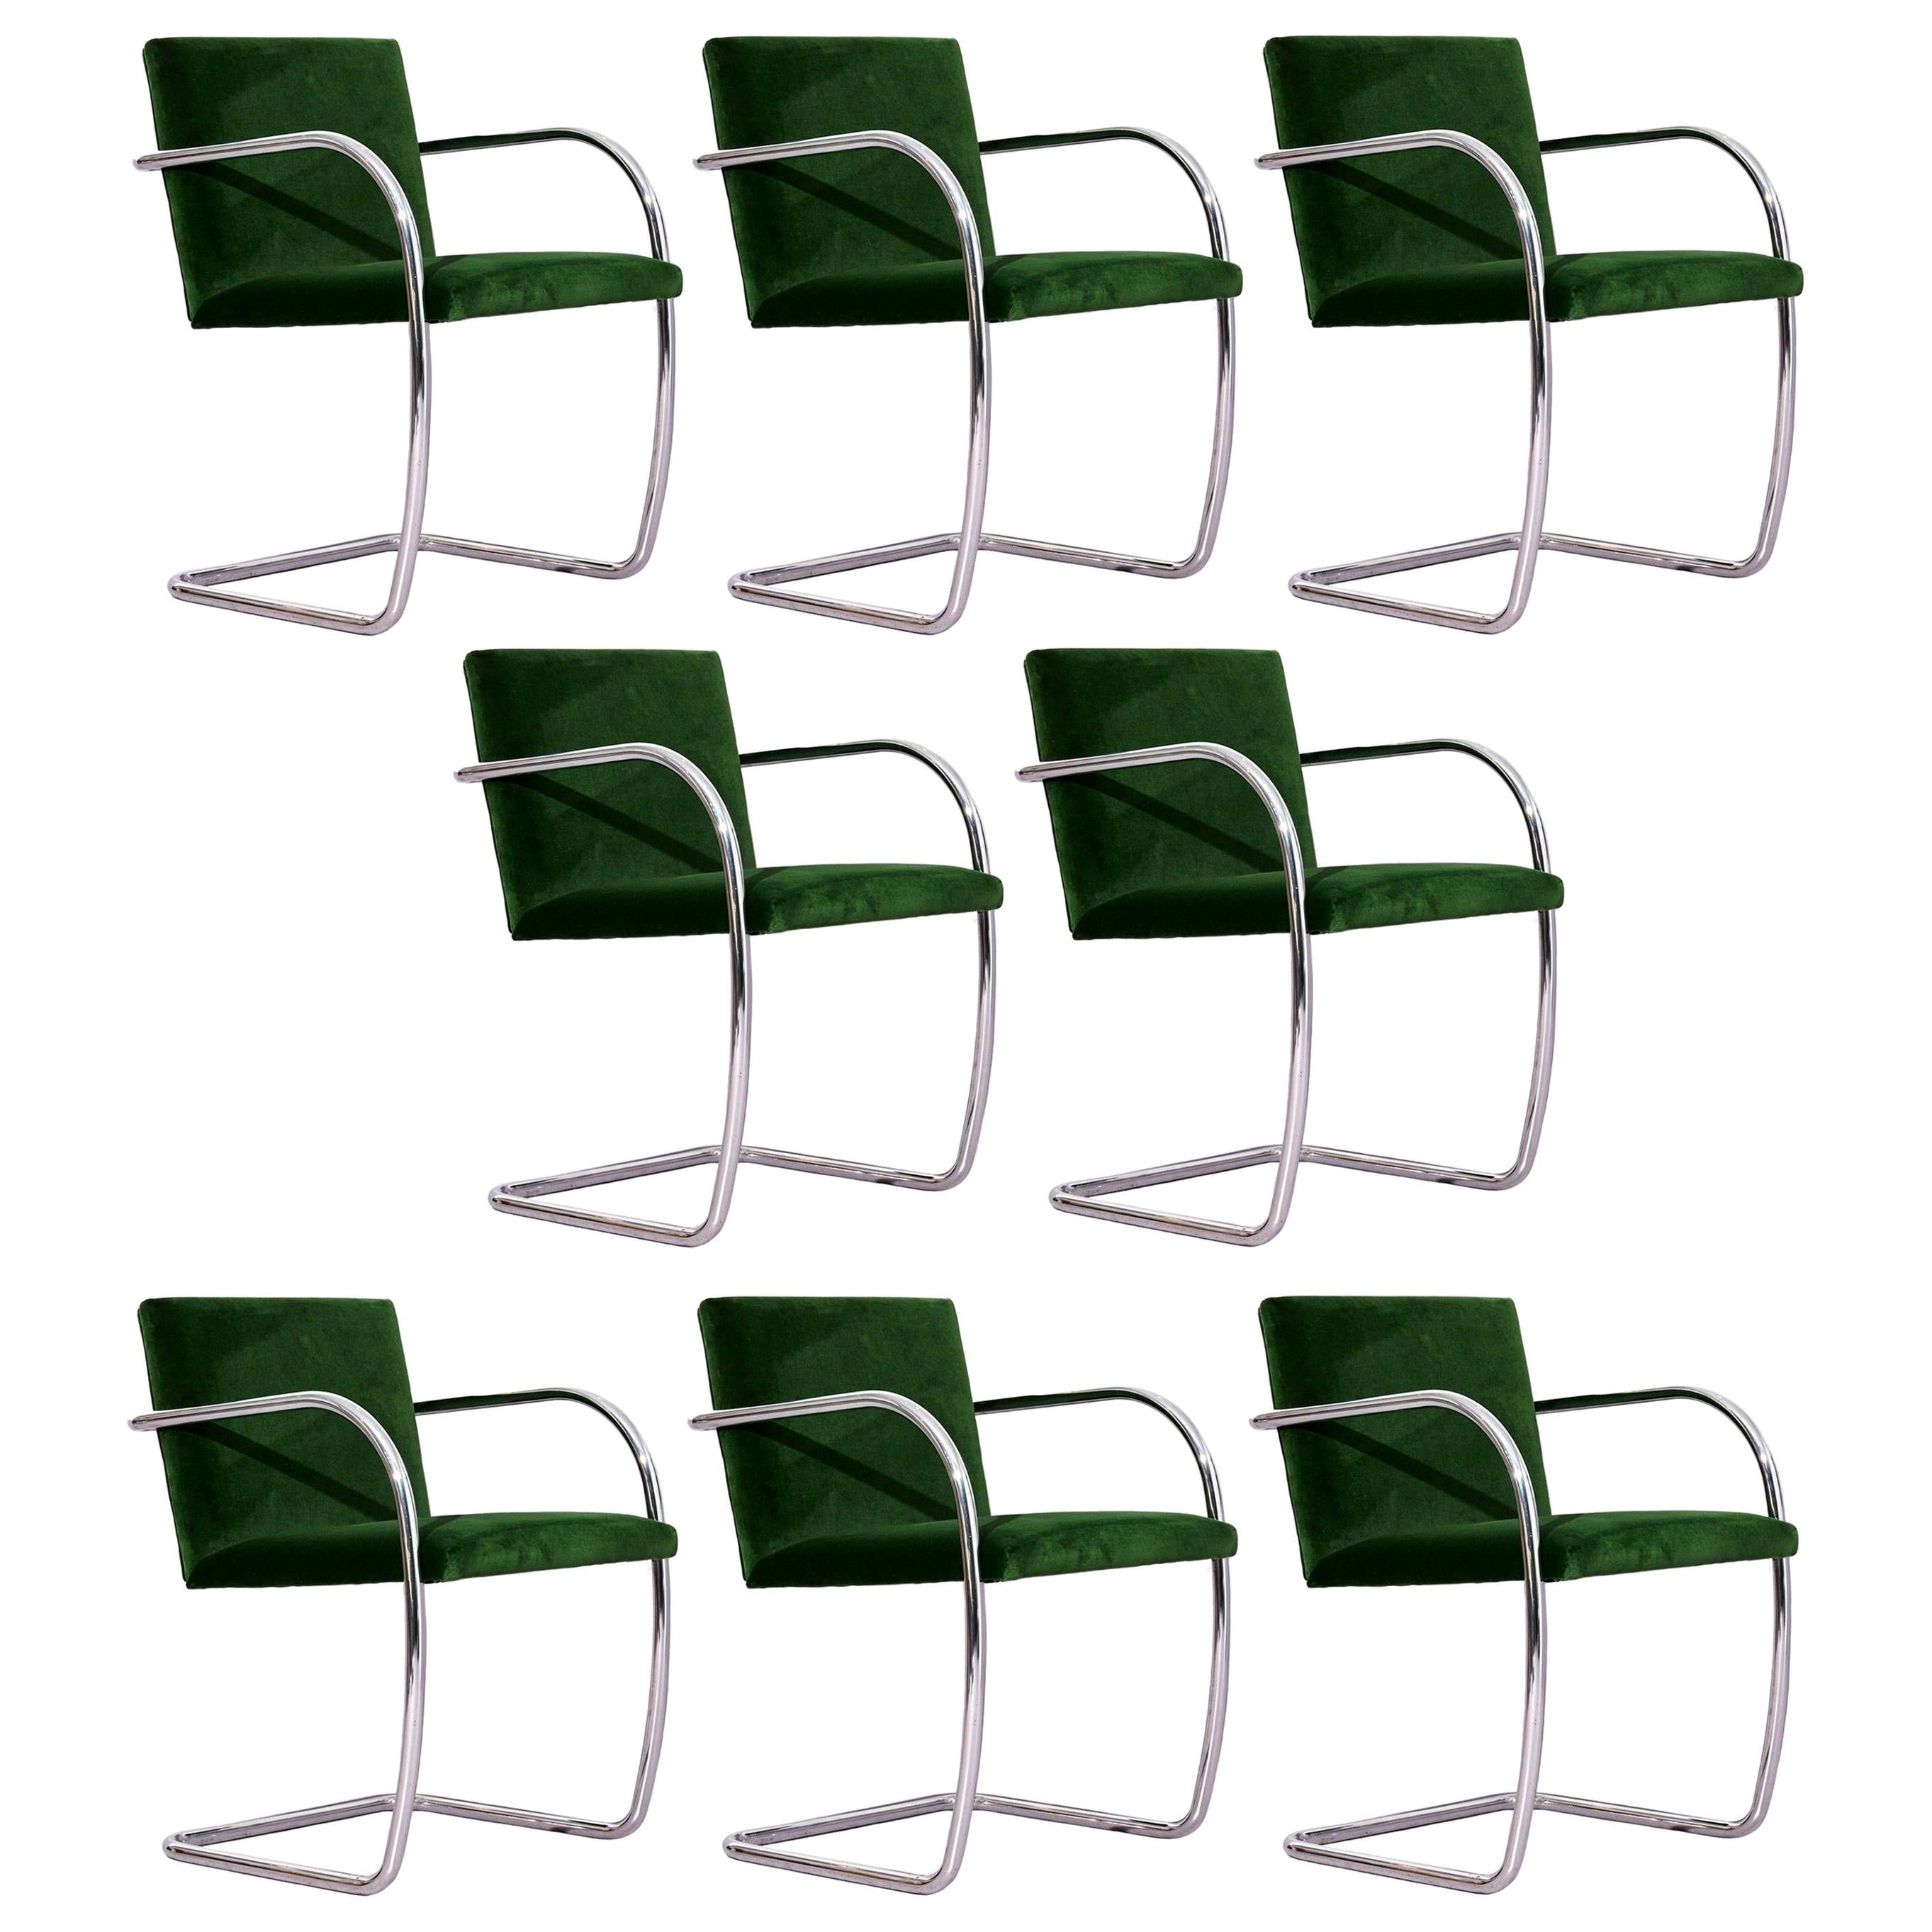 Eight Chrome Mies van der Rohe Tubular Brno Chairs by Knoll in Green Velvet For Sale